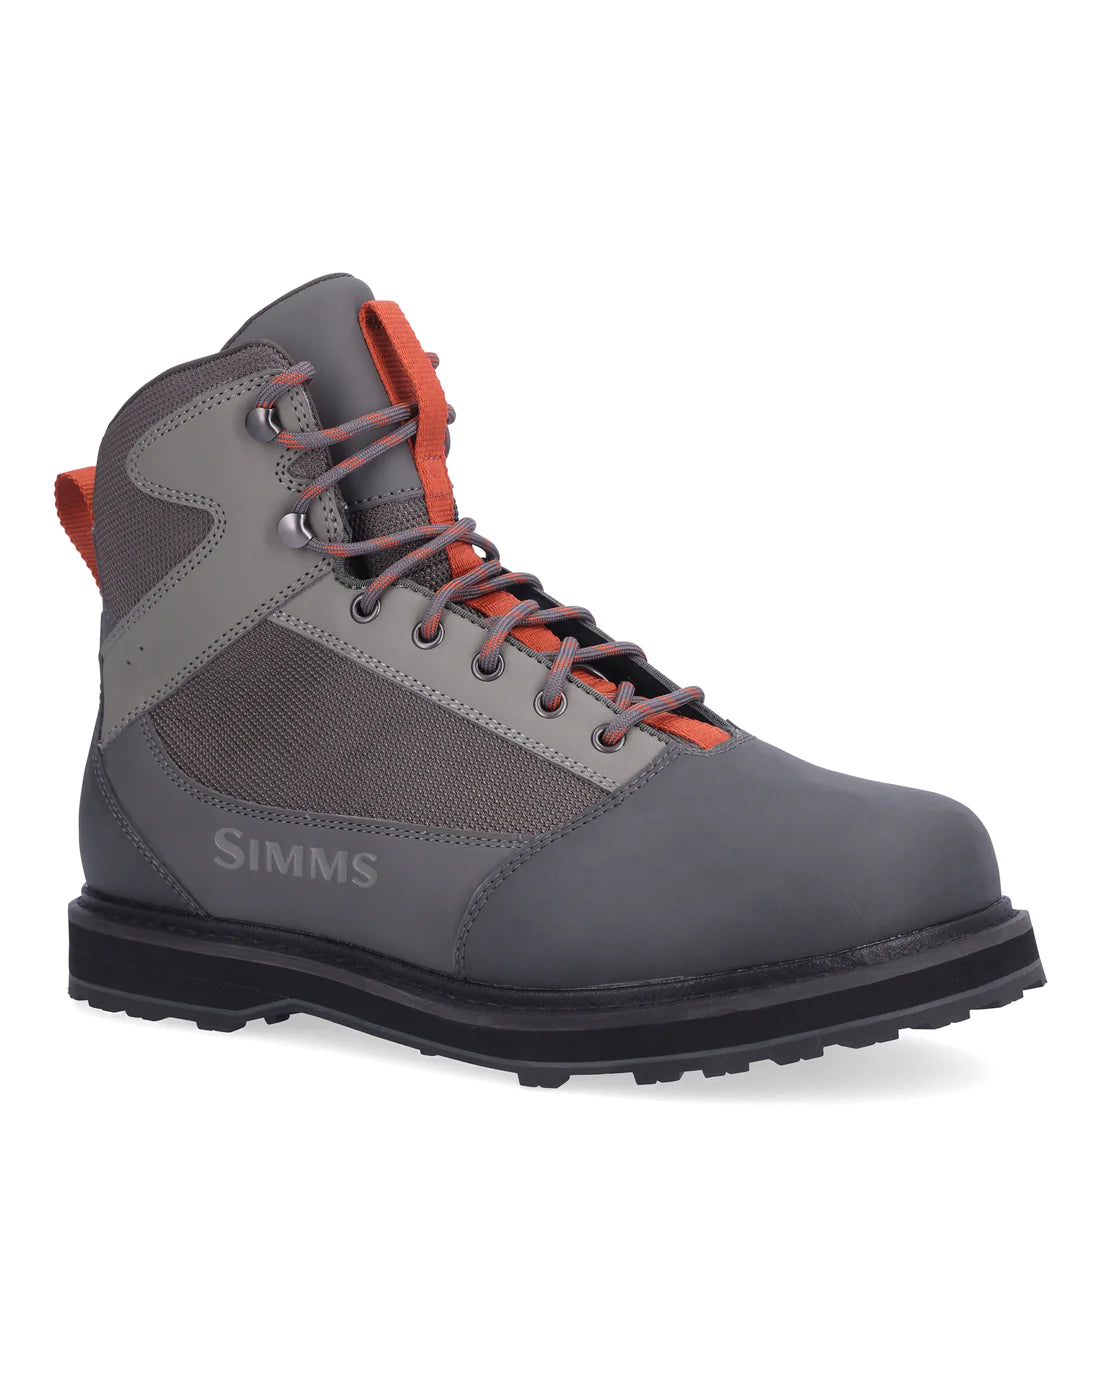 Simms Men's Tributary Boot - Rubber Sole